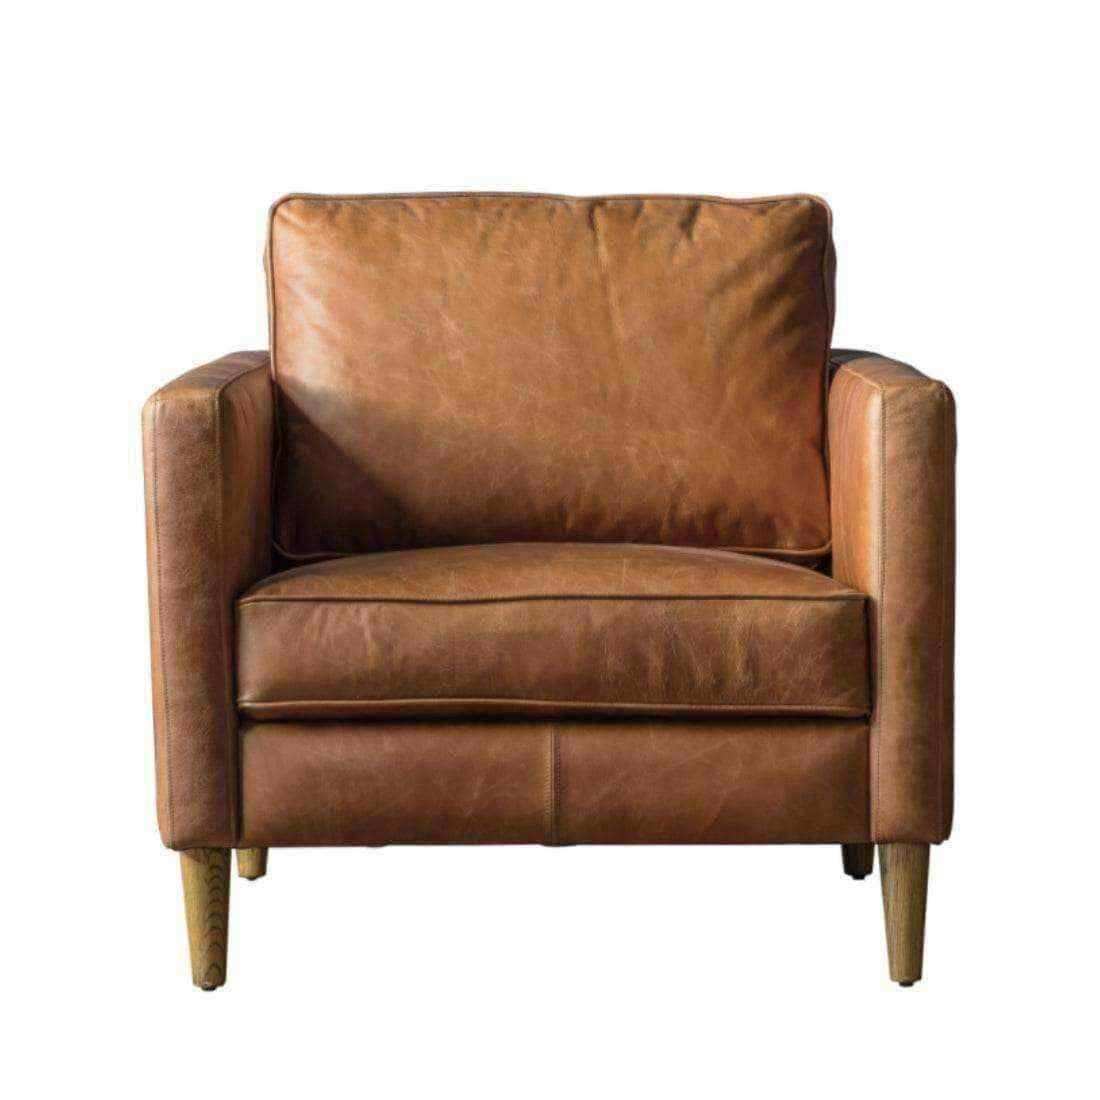 Stylish Vintage Brown Leather Armchair - The Farthing